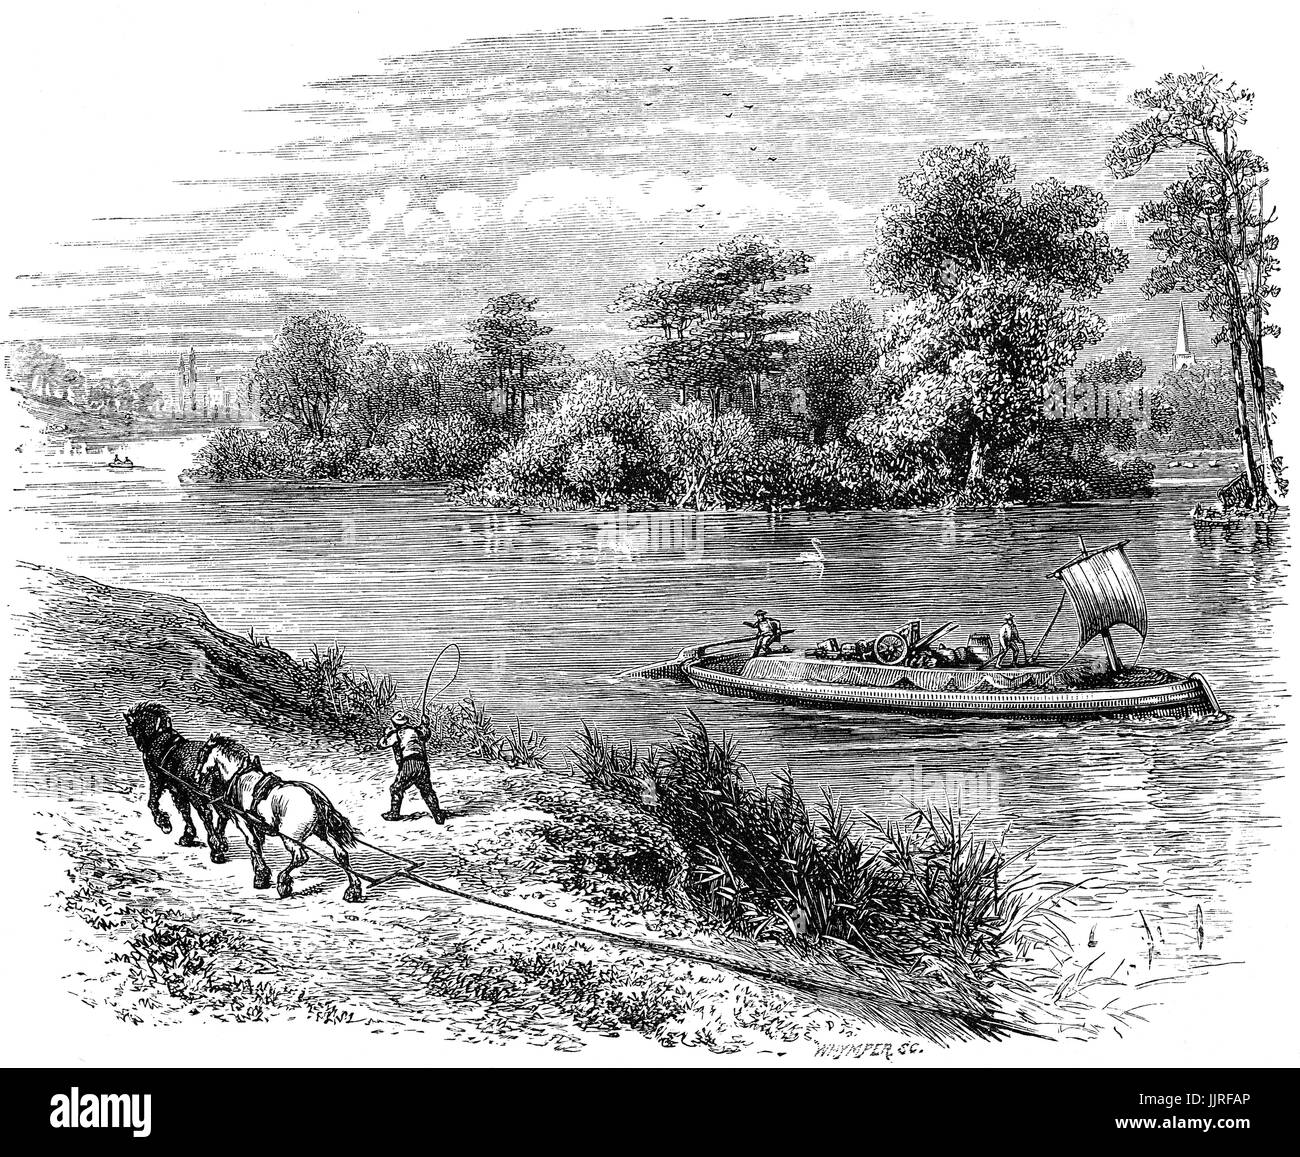 1870: Barges in front of Magna Carta Island, an island in the River Thames lying across the river from the water-meadows at Runnymede.  The island is one of several contenders for being the place where, in 1215, King John sealed the Magna Carta. Whilst the charter itself indicates Runnymede by name, it is possible the island may have been considered part of Runnymede at the time. Near Old Windsor, Berkshire, England Stock Photo